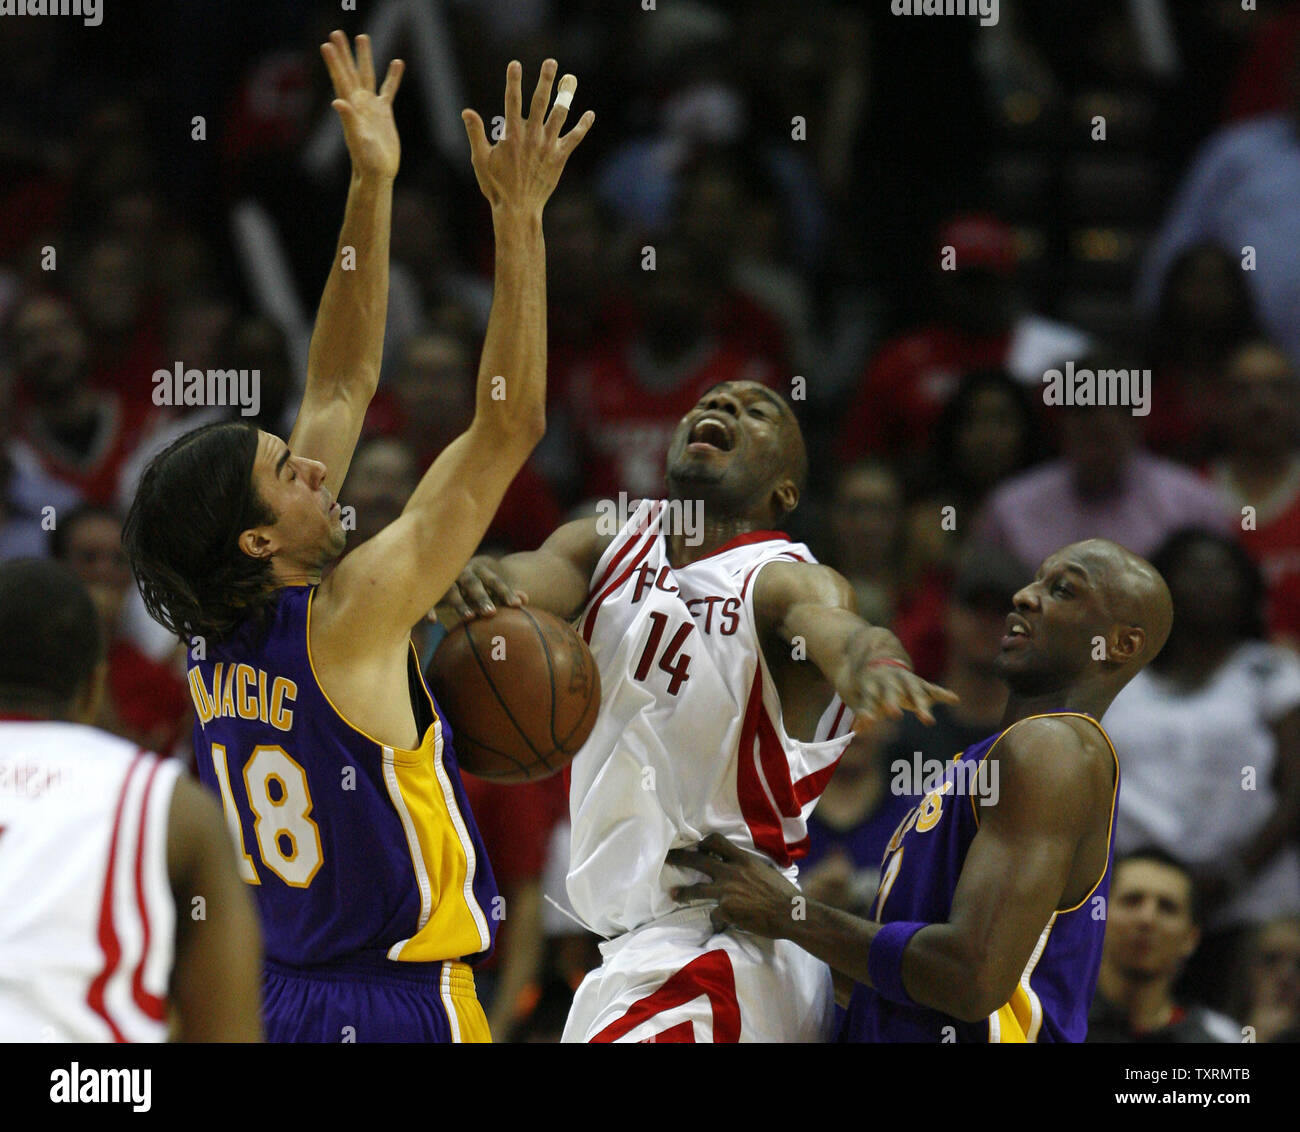 Houston Rockets forward Carl Landry (C) battles with Los Angeles Lakers guard Sasha Vujacic (L) and forward Lamar Odom (R) for an offensive rebound in the second half of Game 6 of the Western Conference semifinals at Toyota Center in Houston, Texas on May 14, 2009. The Rockets defeated the Lakers 95-80 to tie the best-of-seven series 3-3. (UPI Photo/Aaron M. Sprecher) Stock Photo